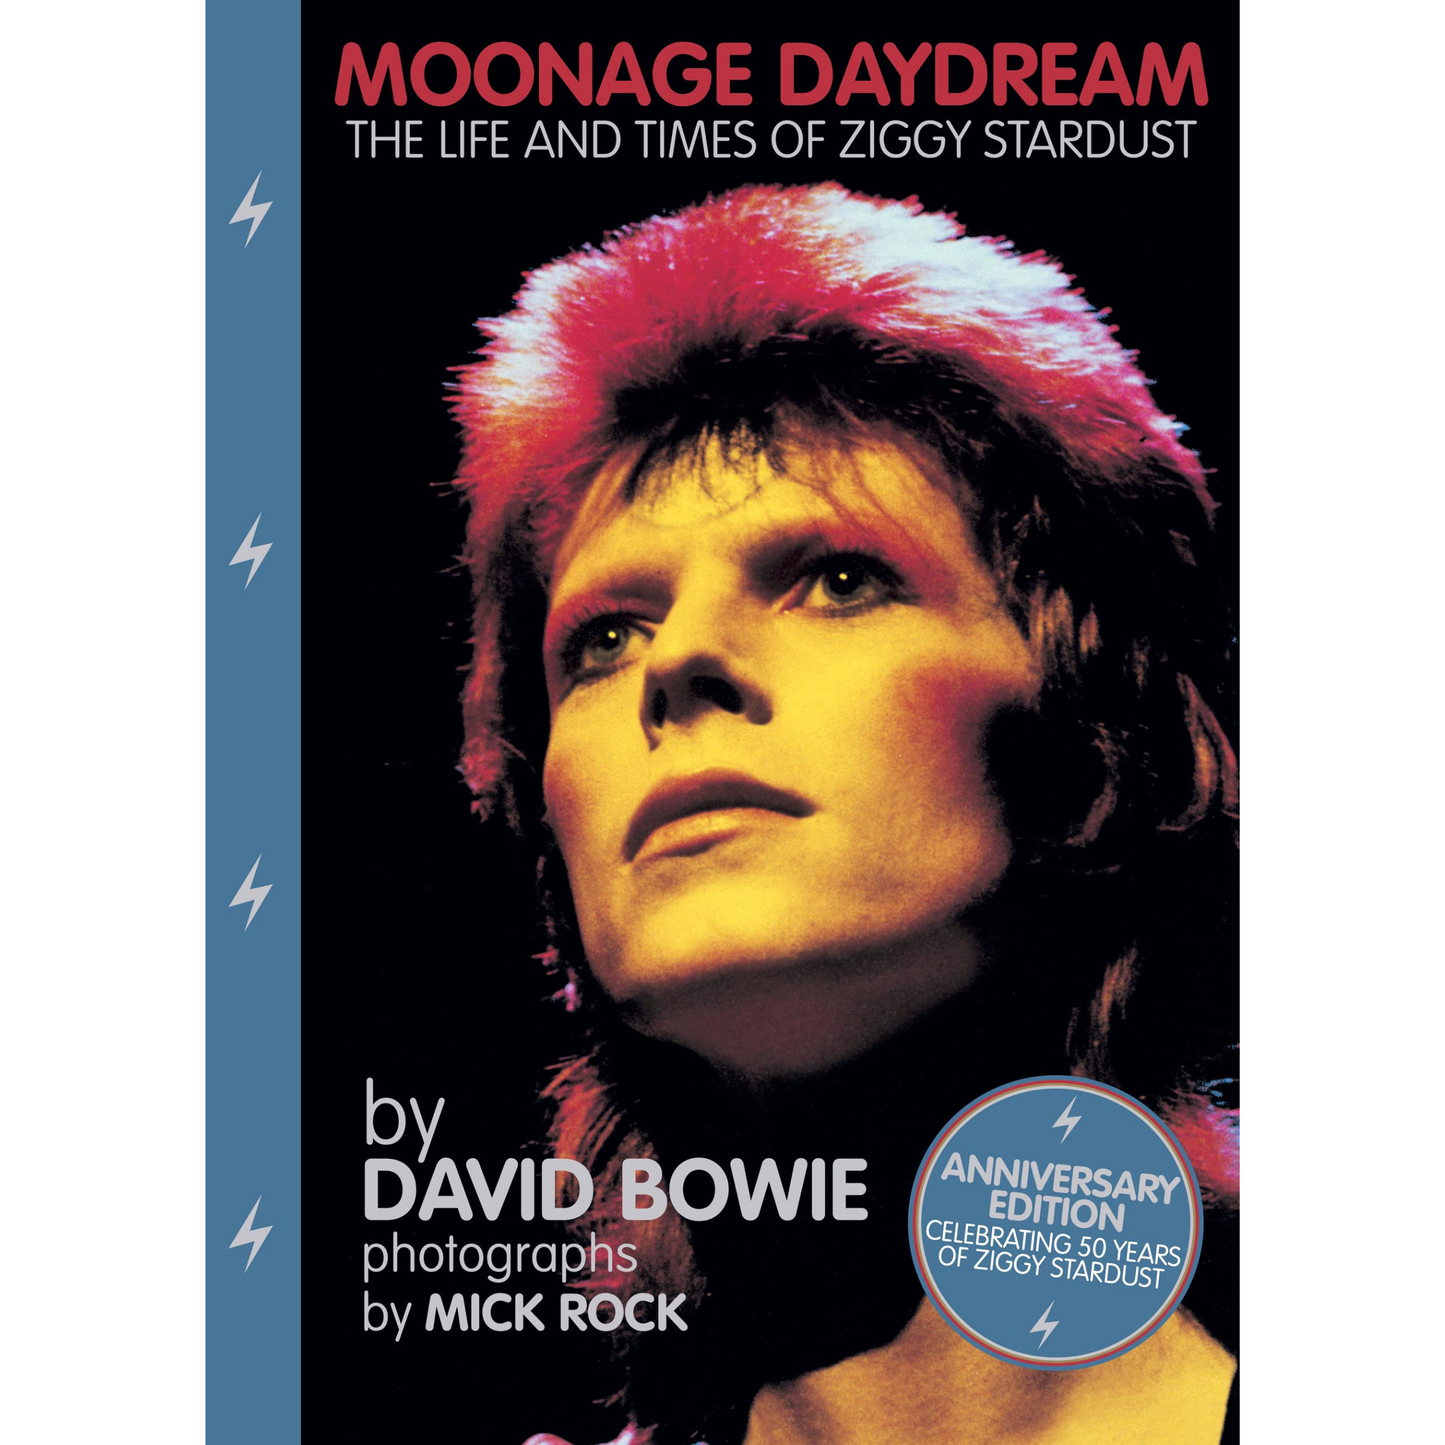 Moonage Daydream book front cover featuring an image of David Bowie